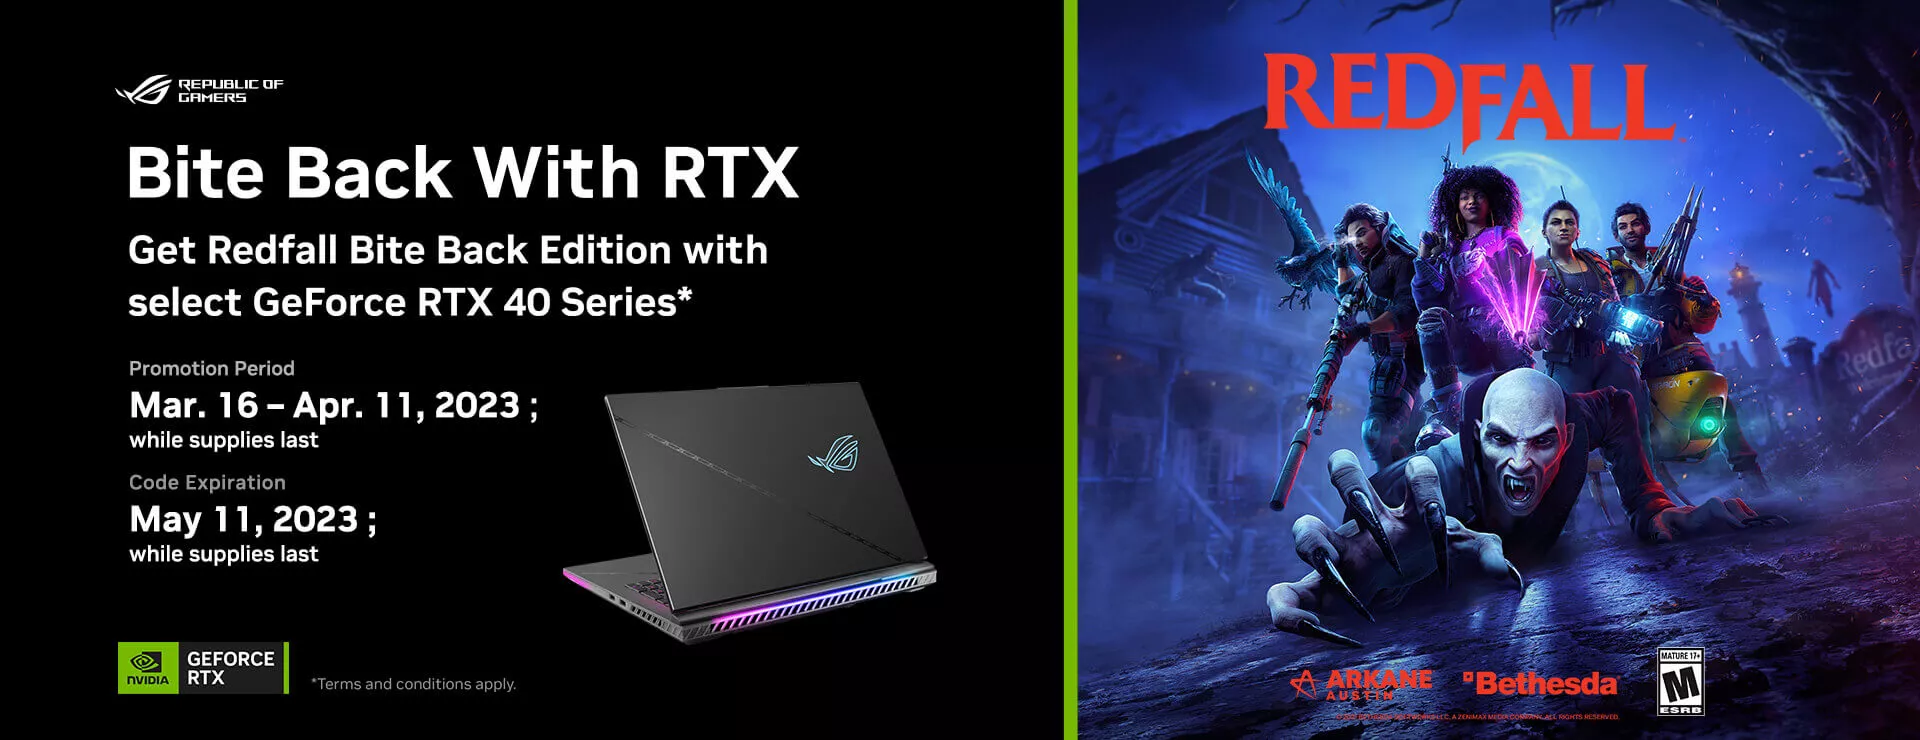 The banner has NVIDIA RTX game bundle offers and duration info with image of a ROG laptop and graphic cards image on the left. Bundle offers users who purchase ROG products with selected RTX40 series GPU will get a free copy of Redfall Bite Back Edition.   On the right side of the banner is the Redfall Bite Back Edition Key Visual.